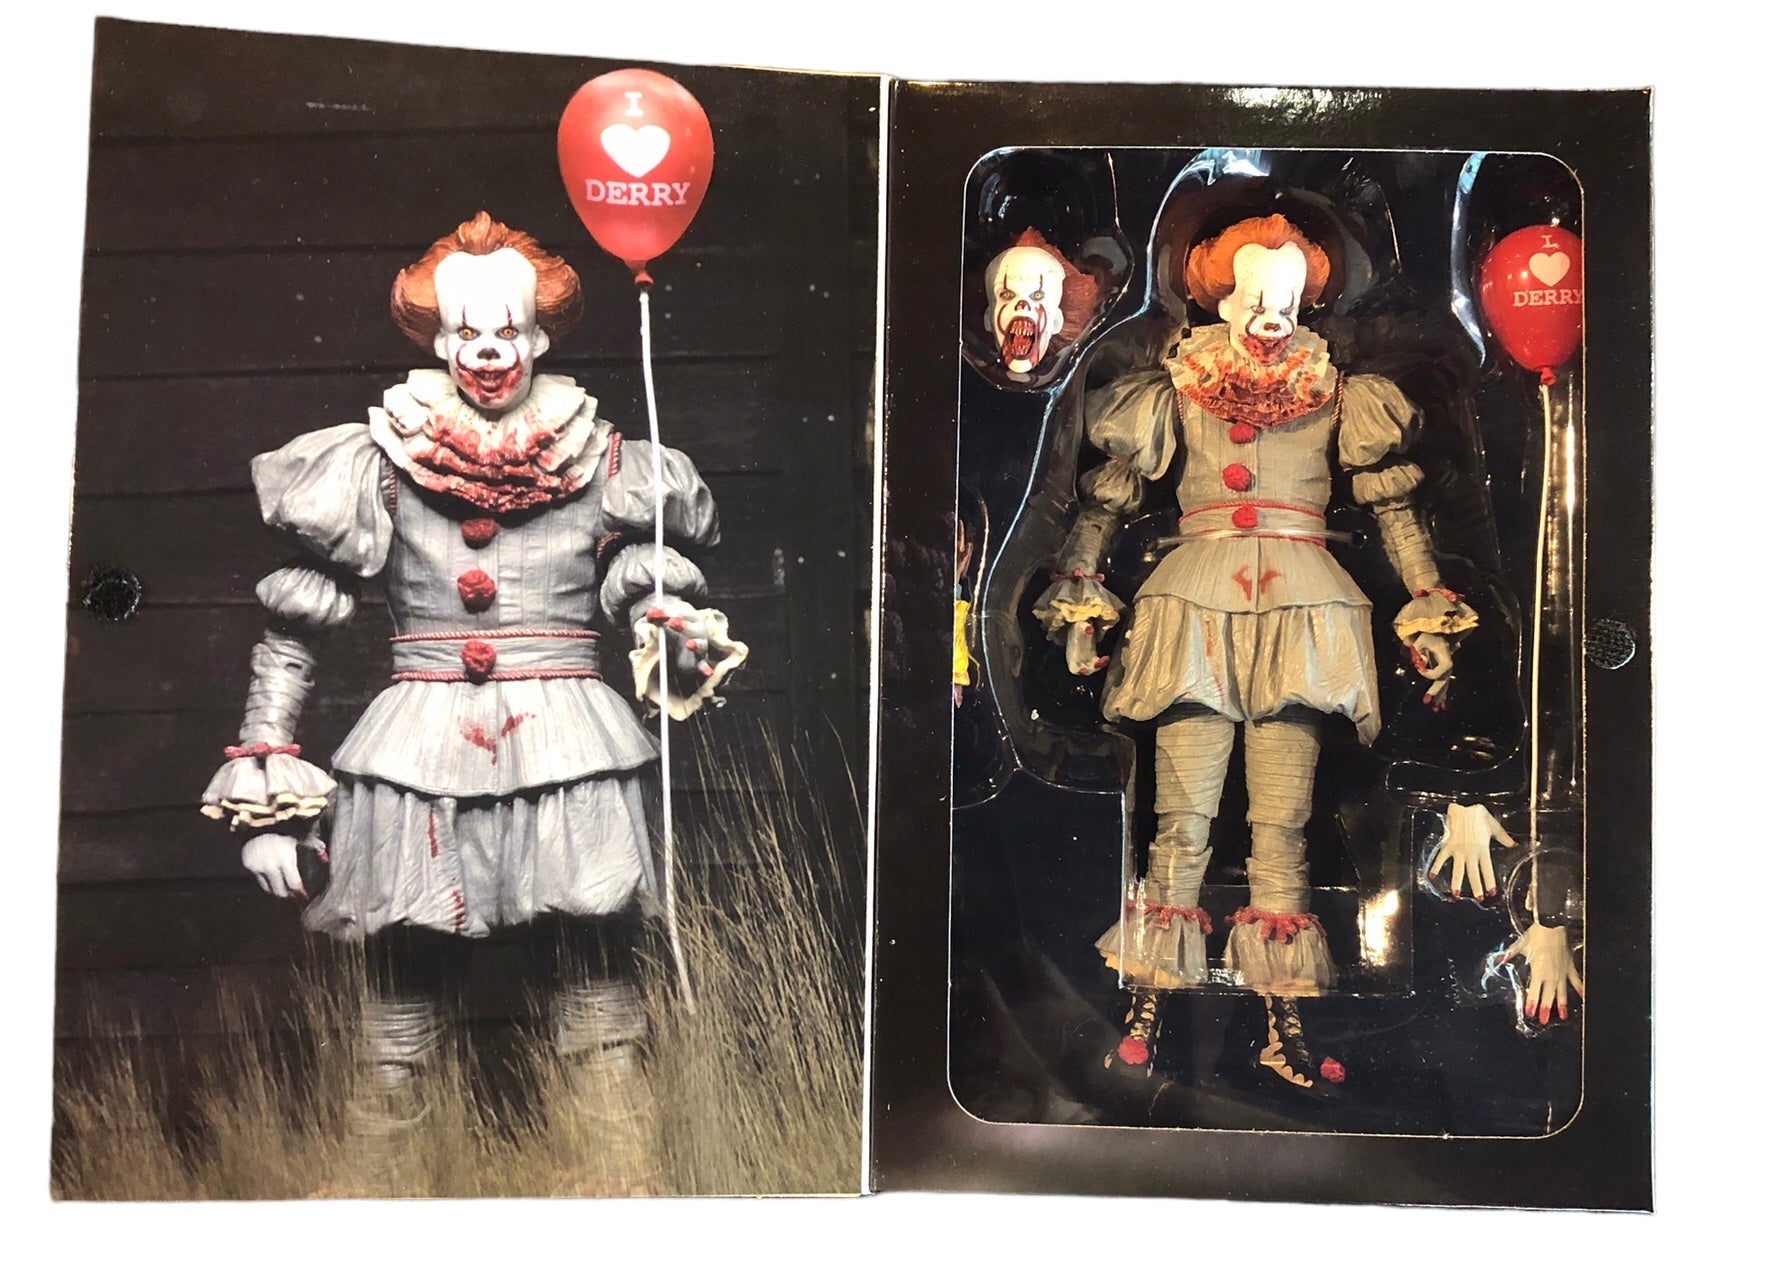 I Love Derry' Ultimate Bloody Pennywise Action Figure NECA Reel